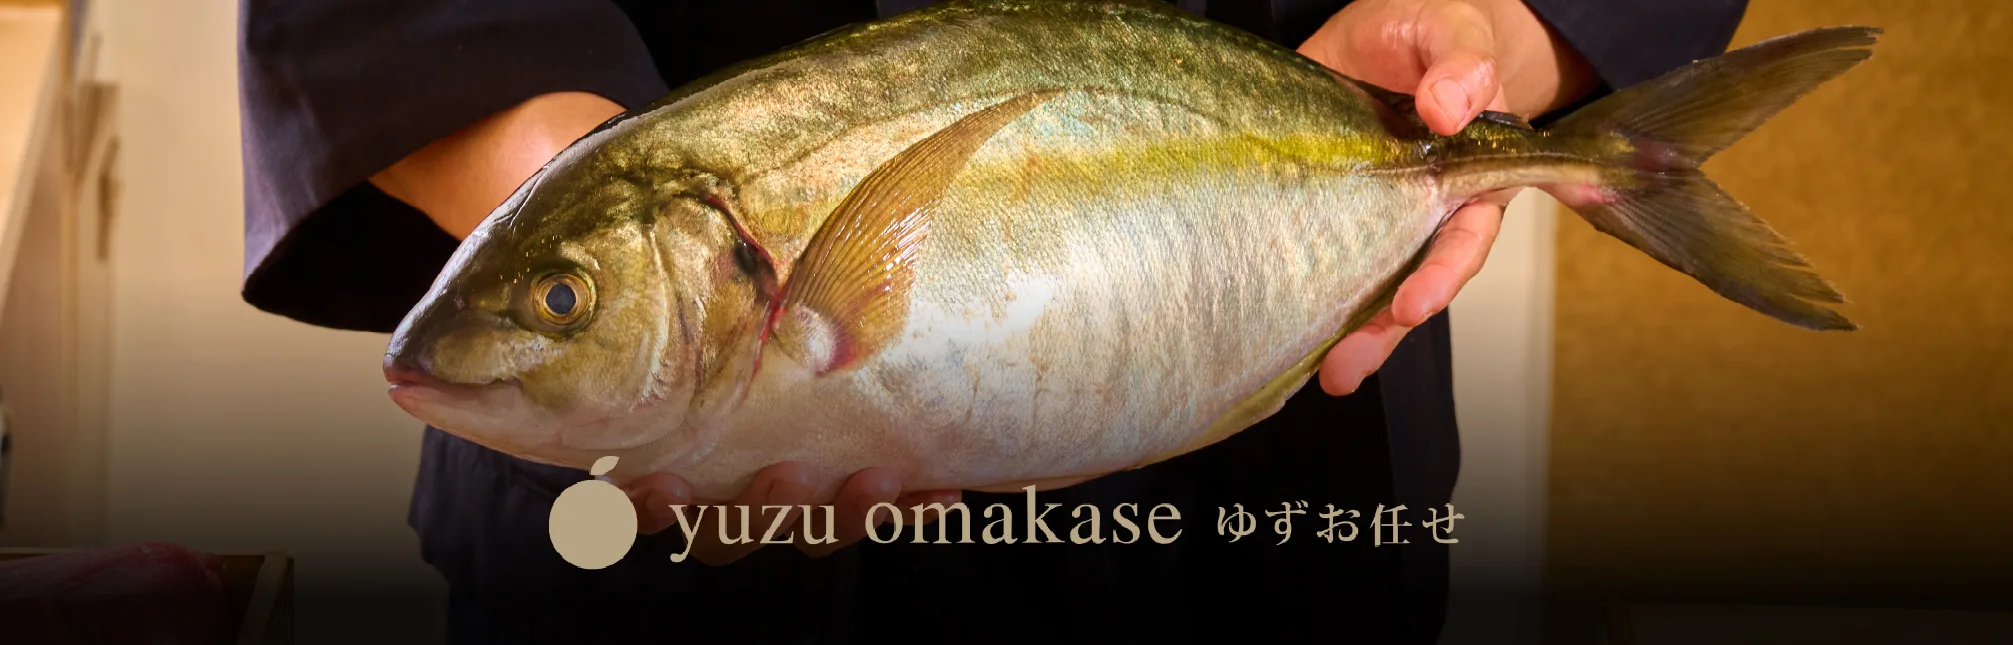 Yuzu Omakase's Nutrient-Rich Seafood Selection